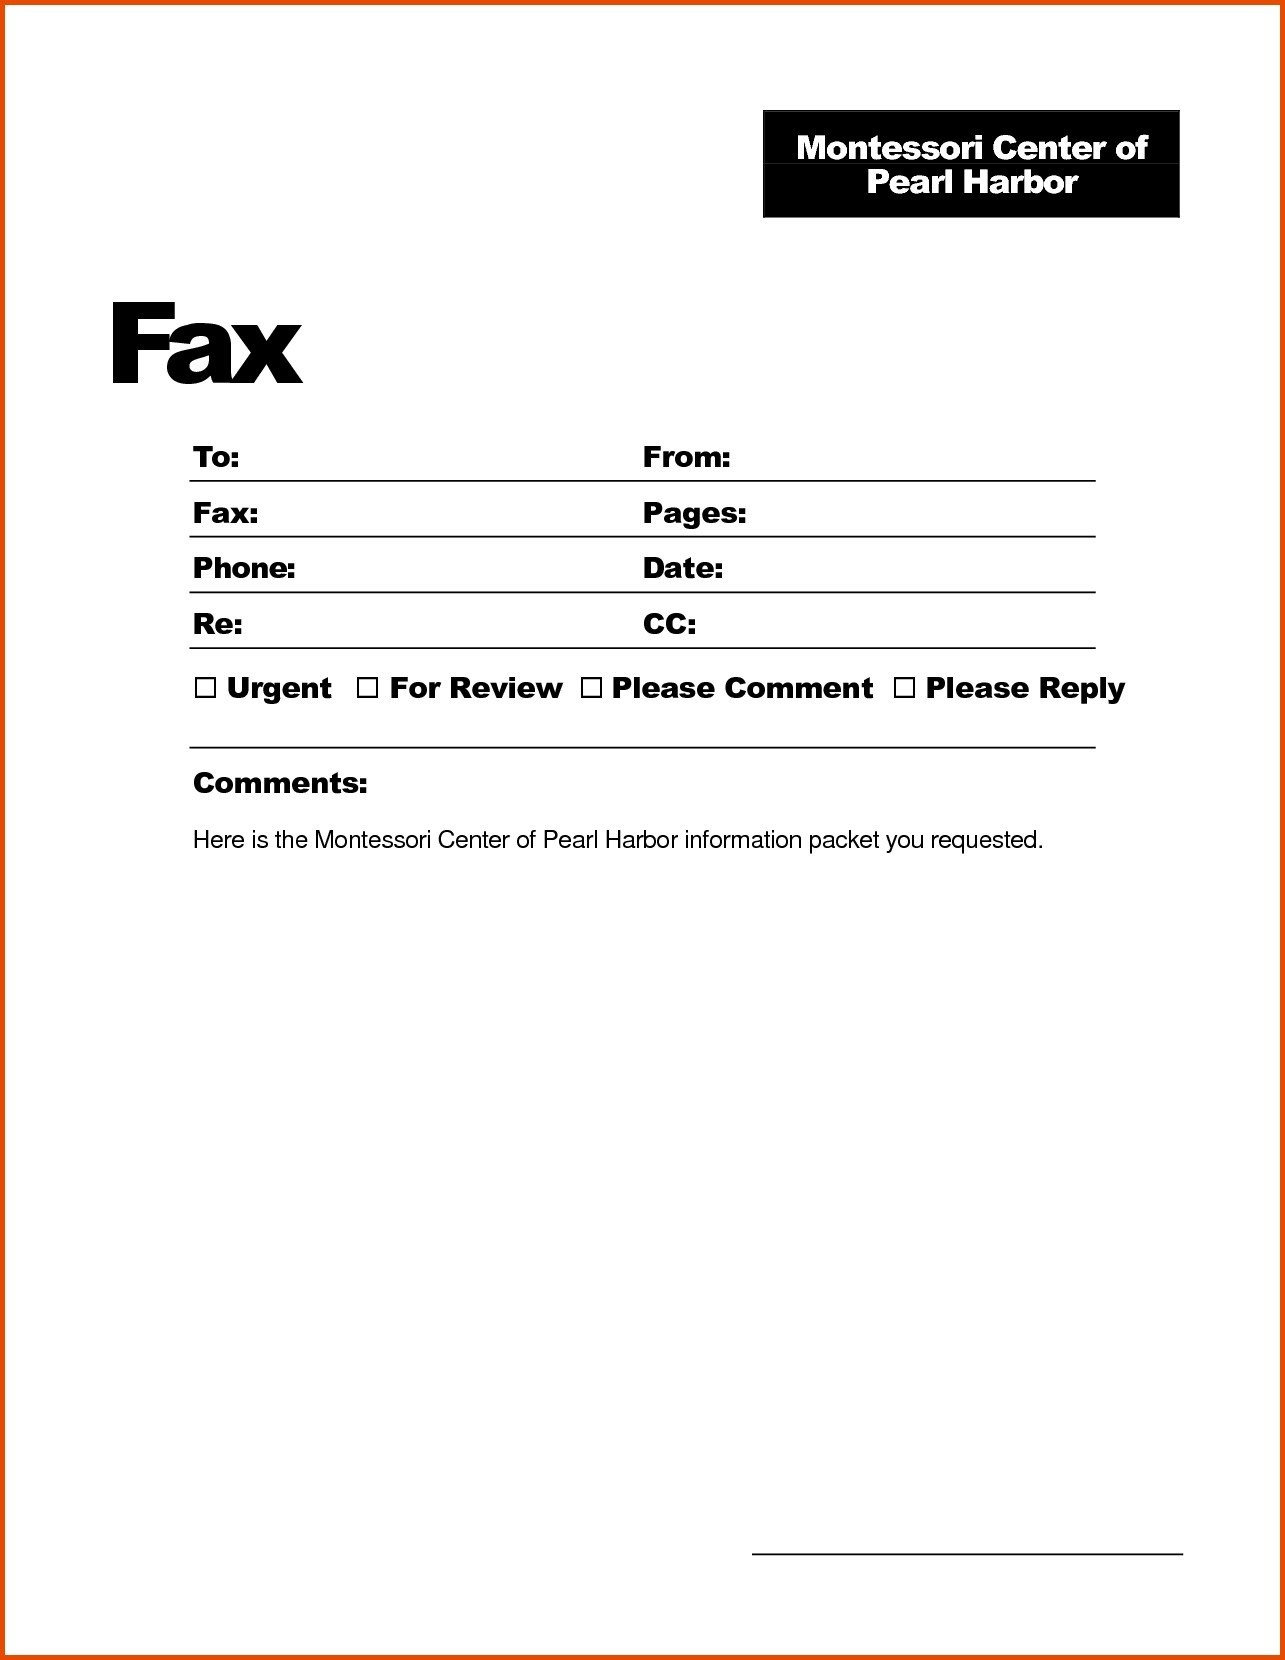 012 Fax Cover Letter Template Picture Black And White Stock Sheet - Free Printable Fax Cover Sheet Pdf